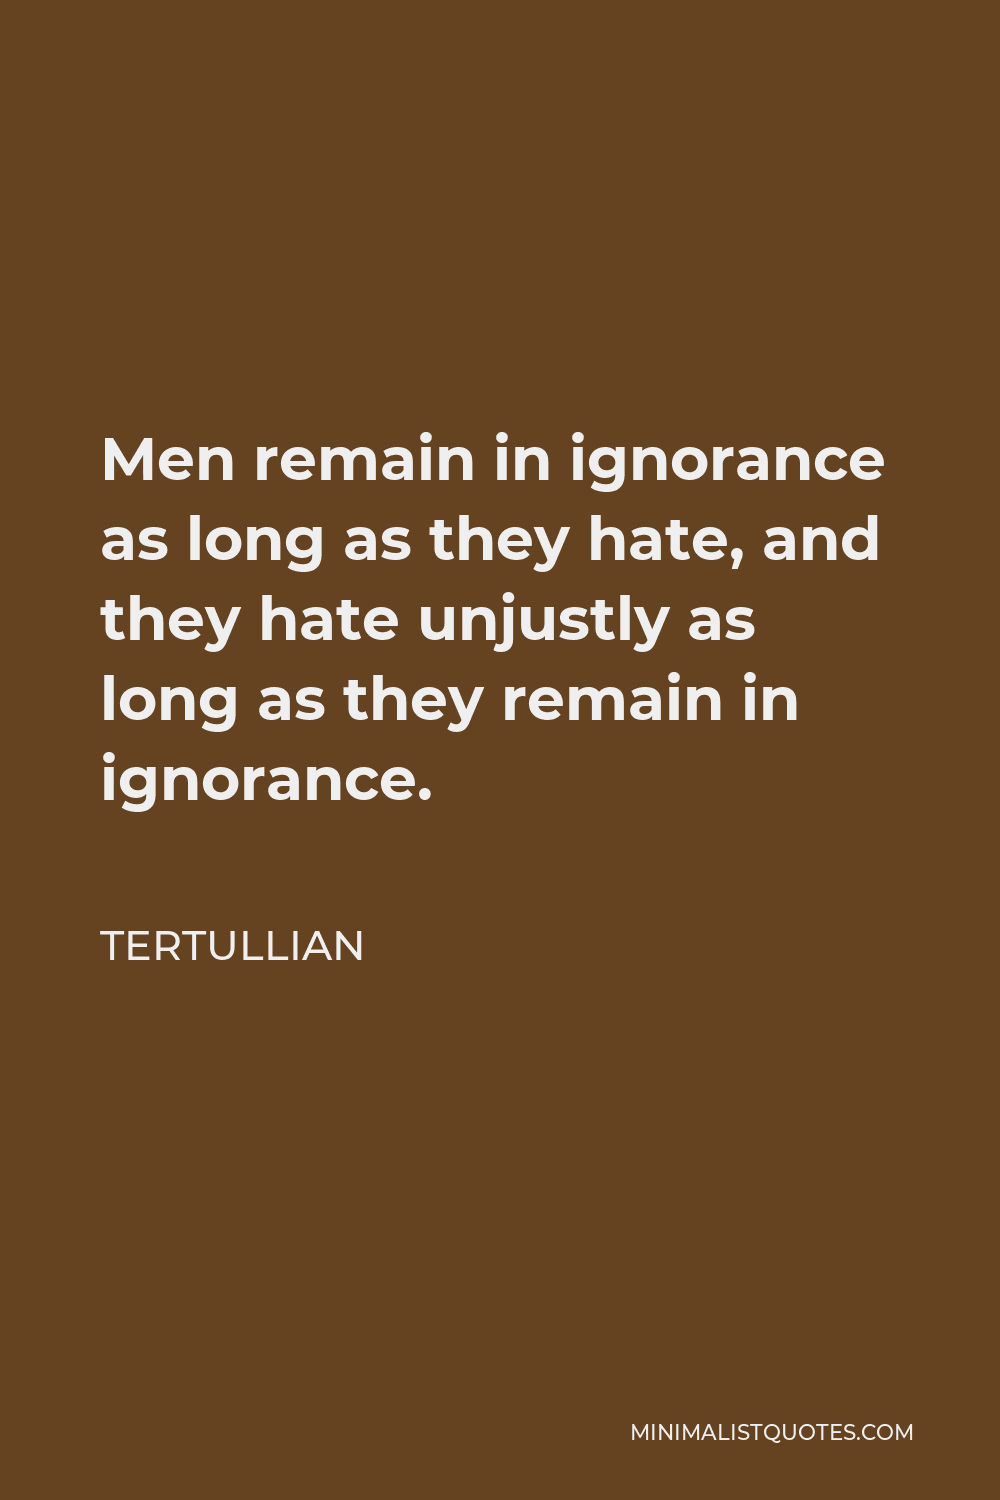 Tertullian Quote - Men remain in ignorance as long as they hate, and they hate unjustly as long as they remain in ignorance.